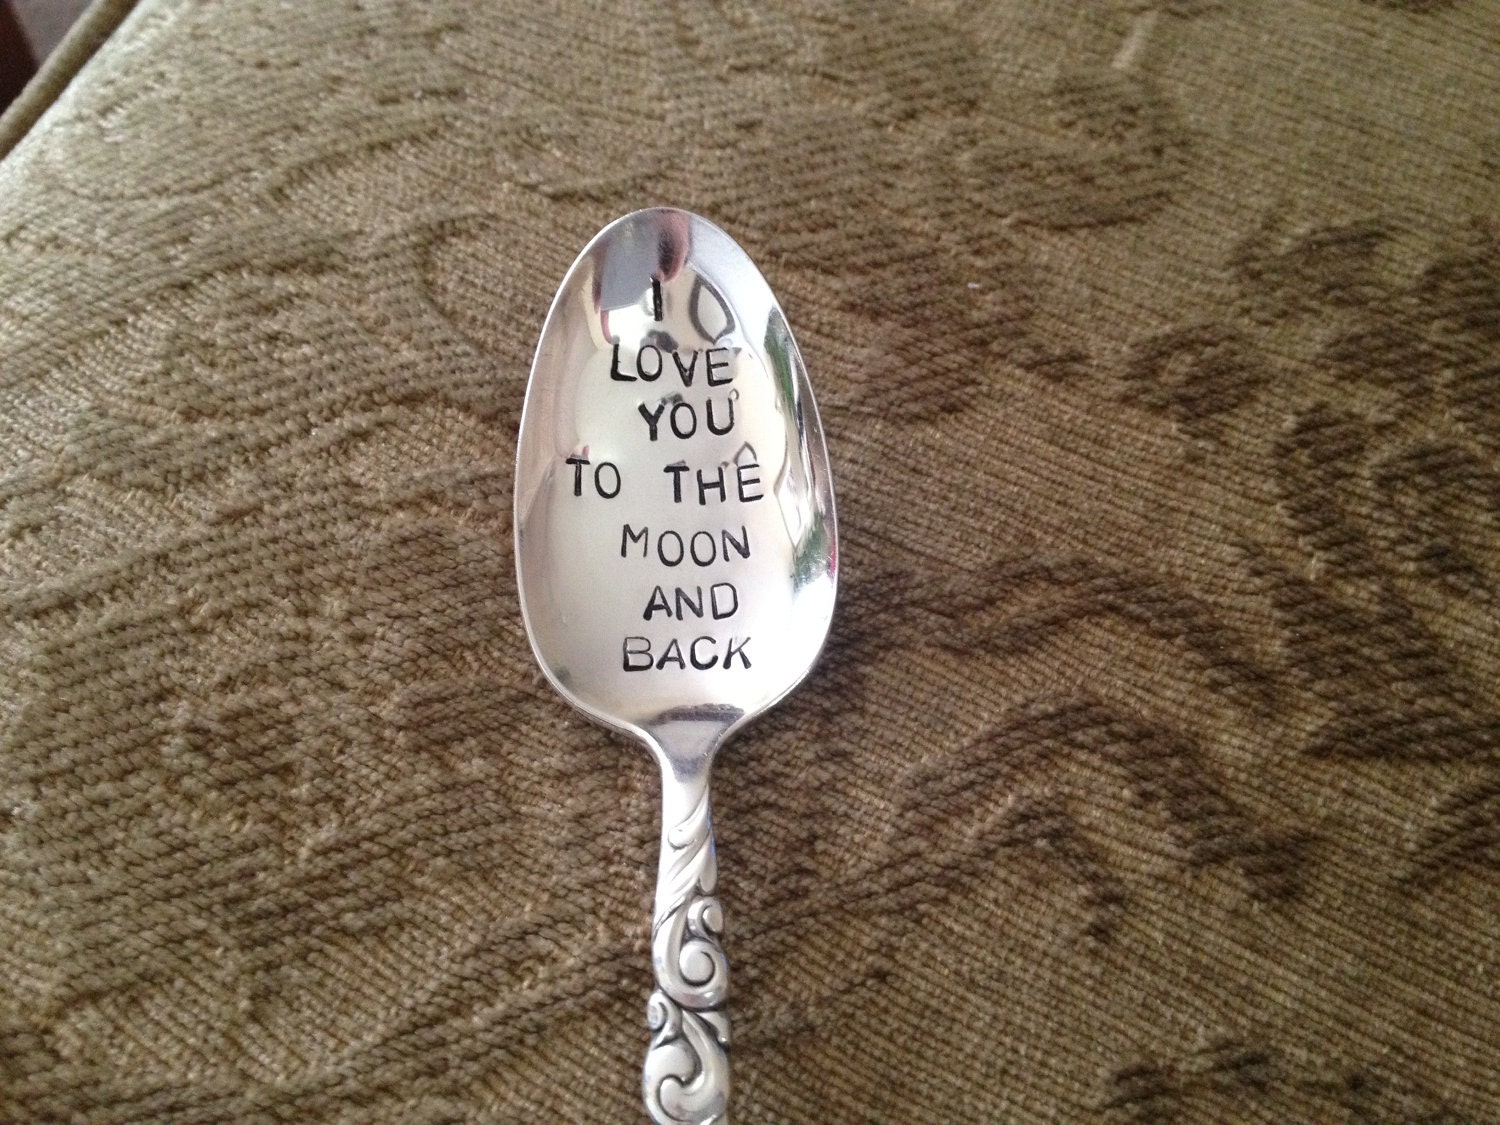 I Love You to the Moon and Back  vintage silverware hand stamped spoon